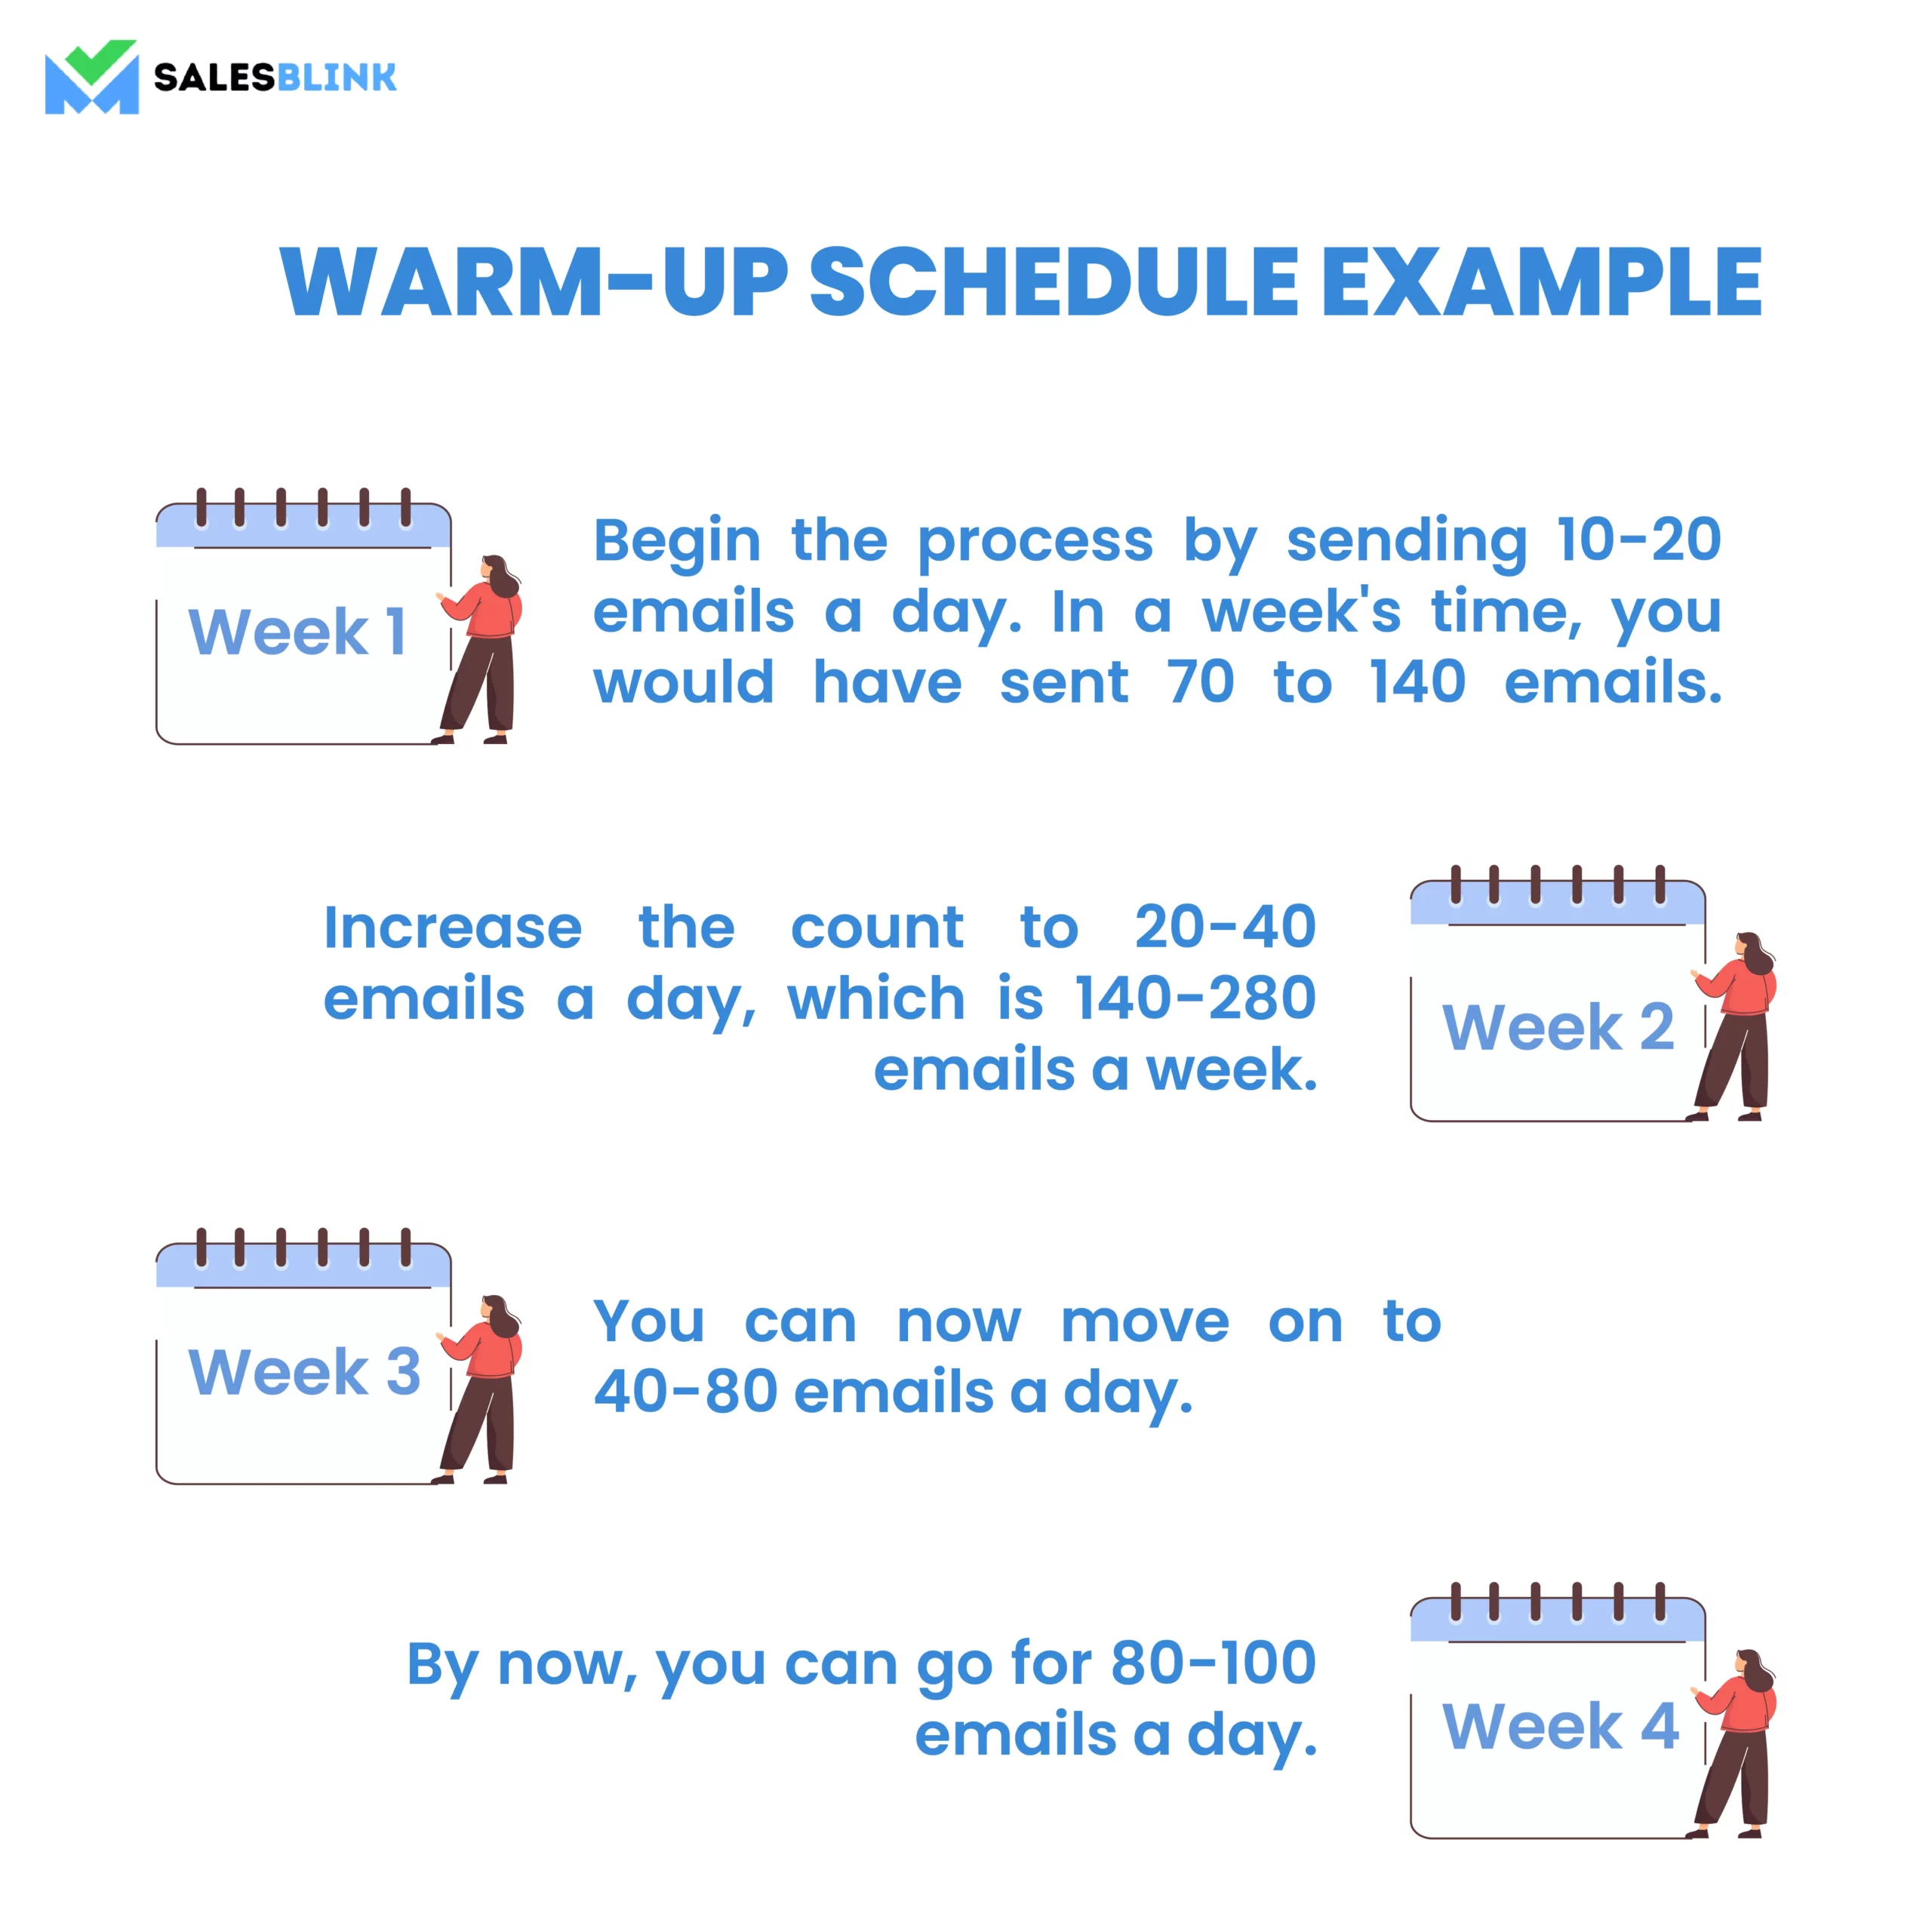 warm-up schedule example-email warmup tools